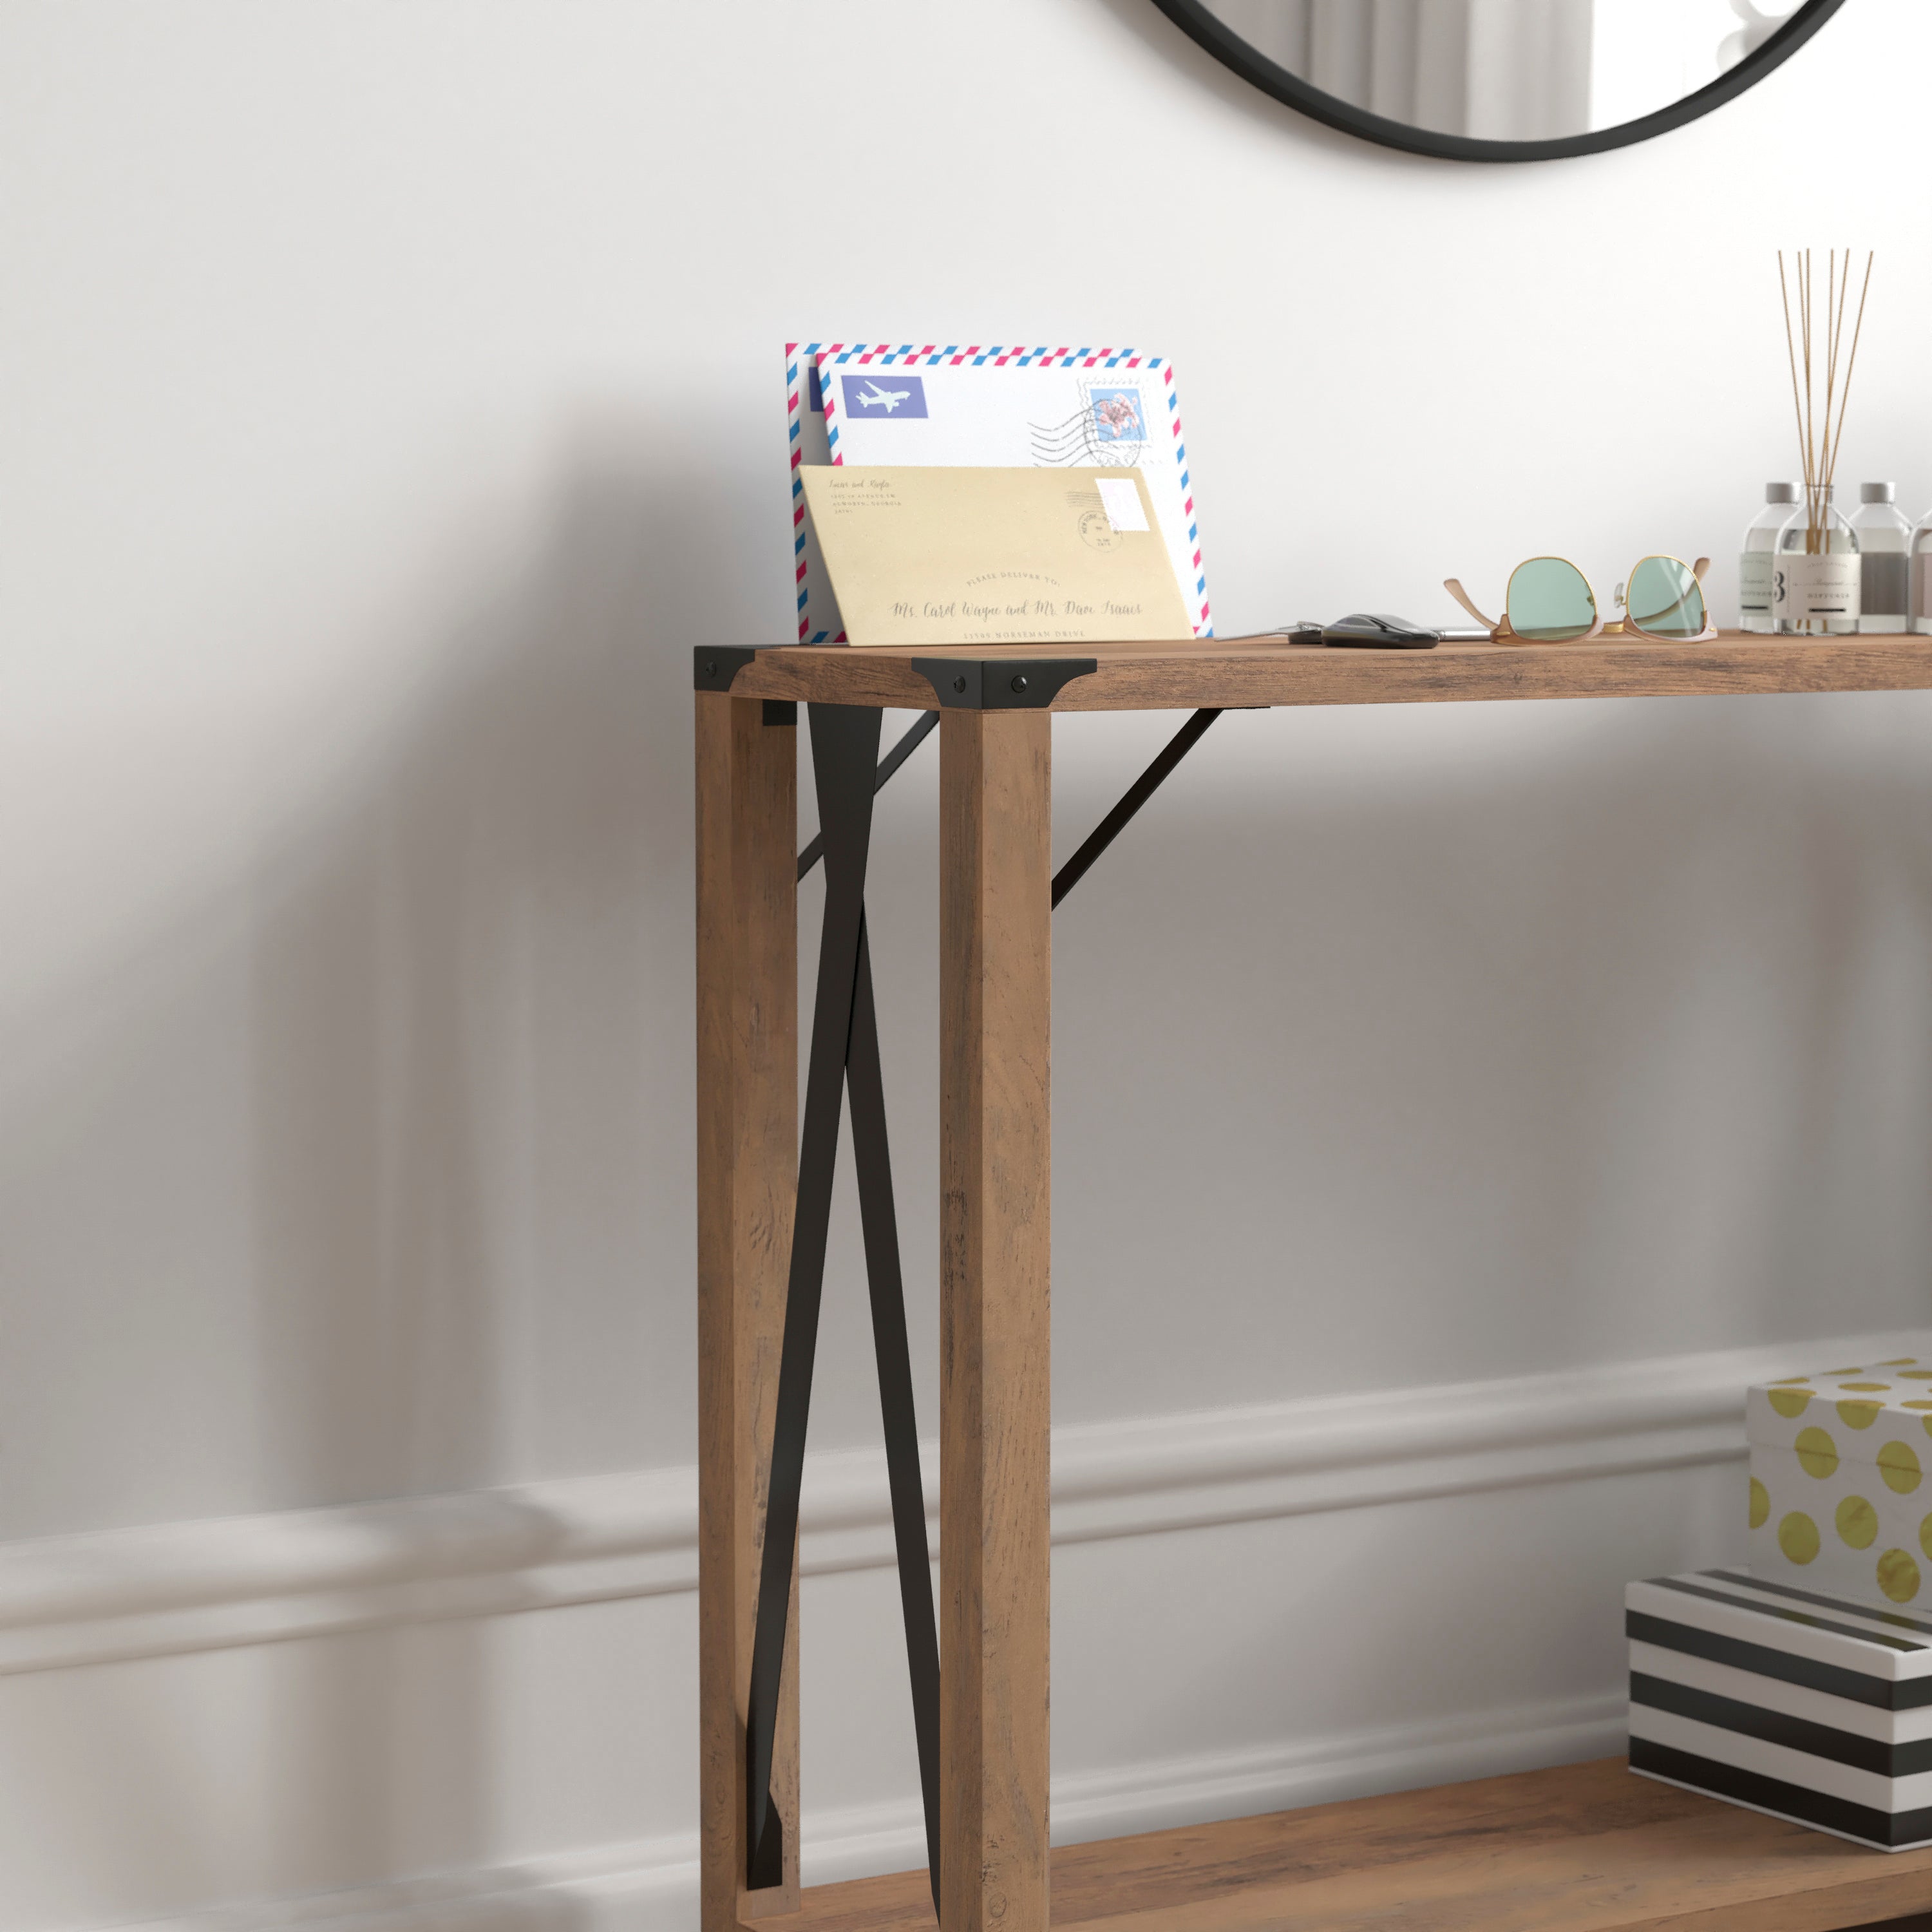 Wyatt Modern Farmhouse Wooden 2 Tier Console Entry Table with Metal Corner Accents and Cross Bracing-Console Table-Flash Furniture-Wall2Wall Furnishings